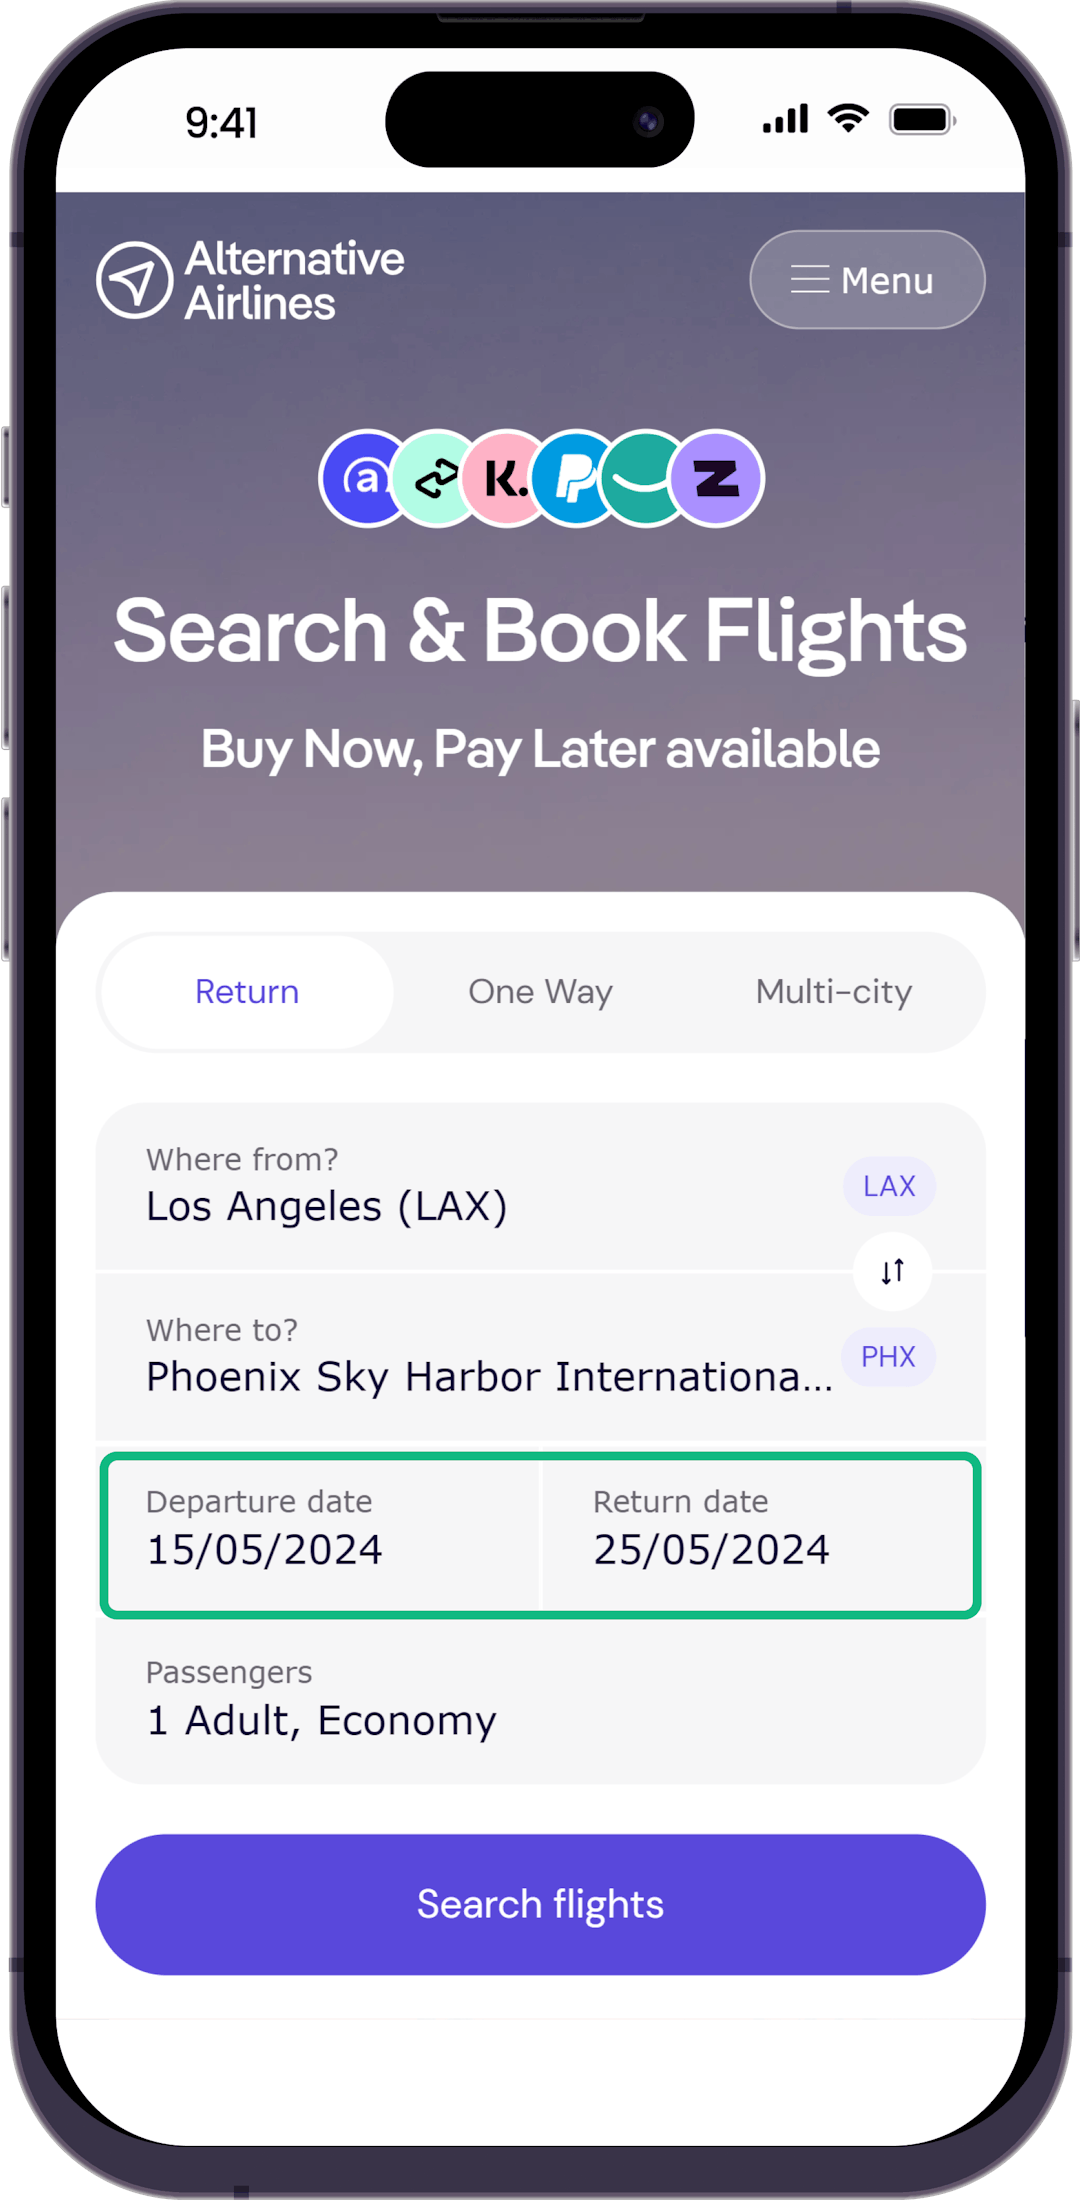 Step 1 - Select dates in search form